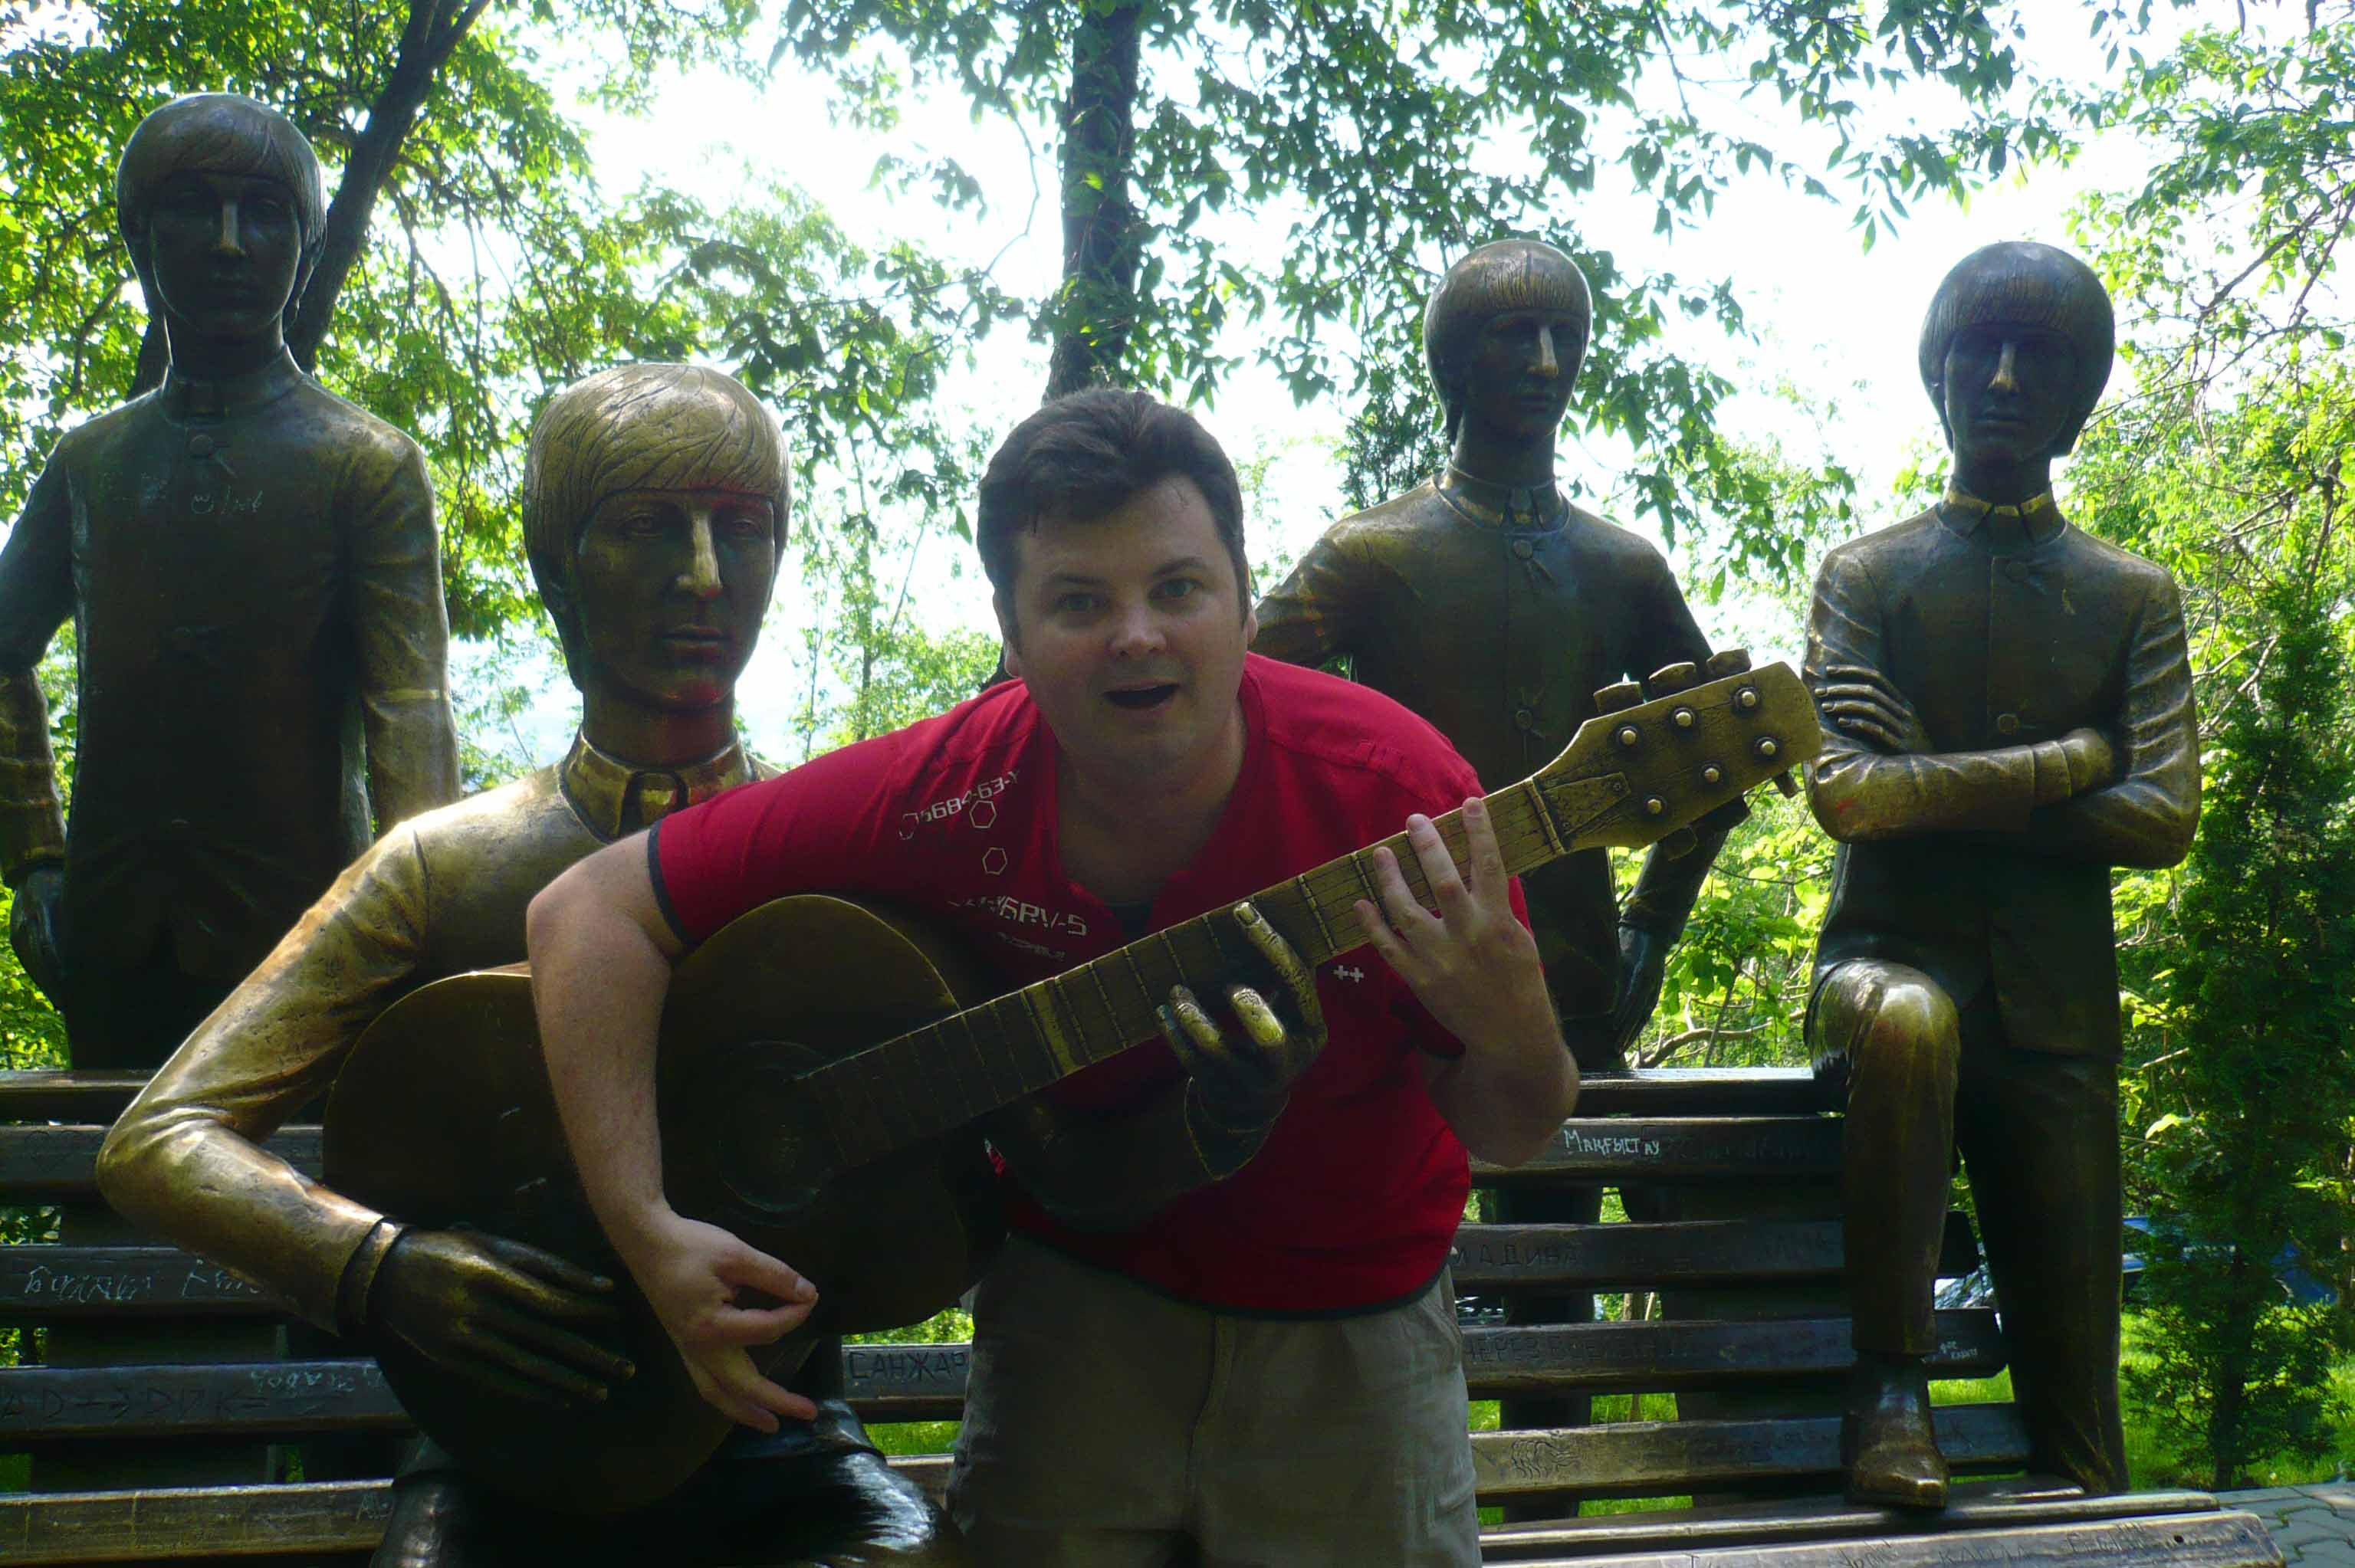 Me and the fab four at Kok Tobe